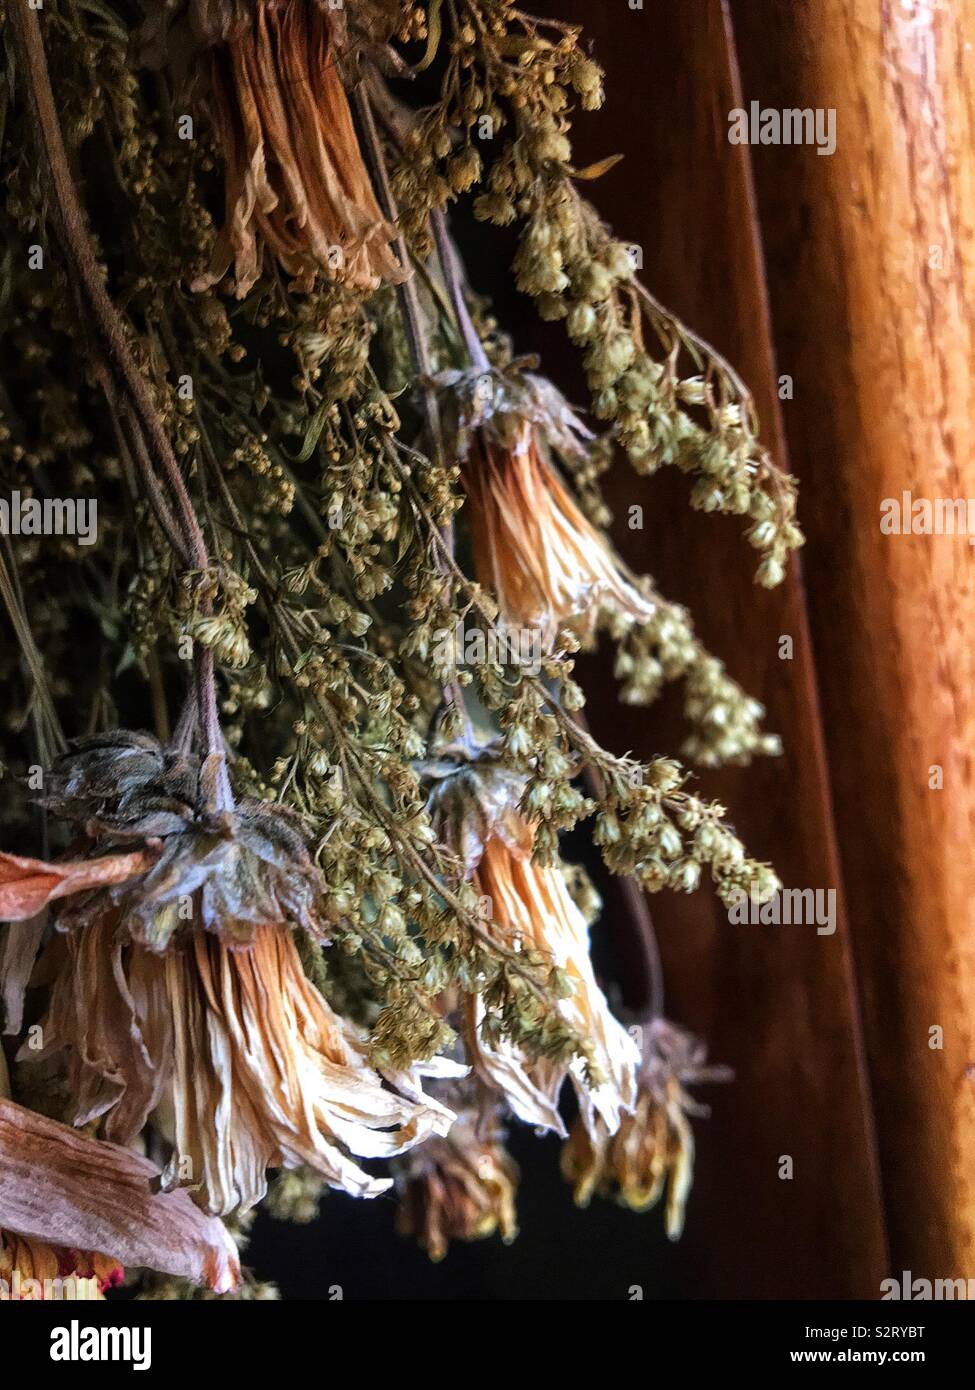 Beautiful bouquet of fresh dried flowers hanging upside down. Stock Photo